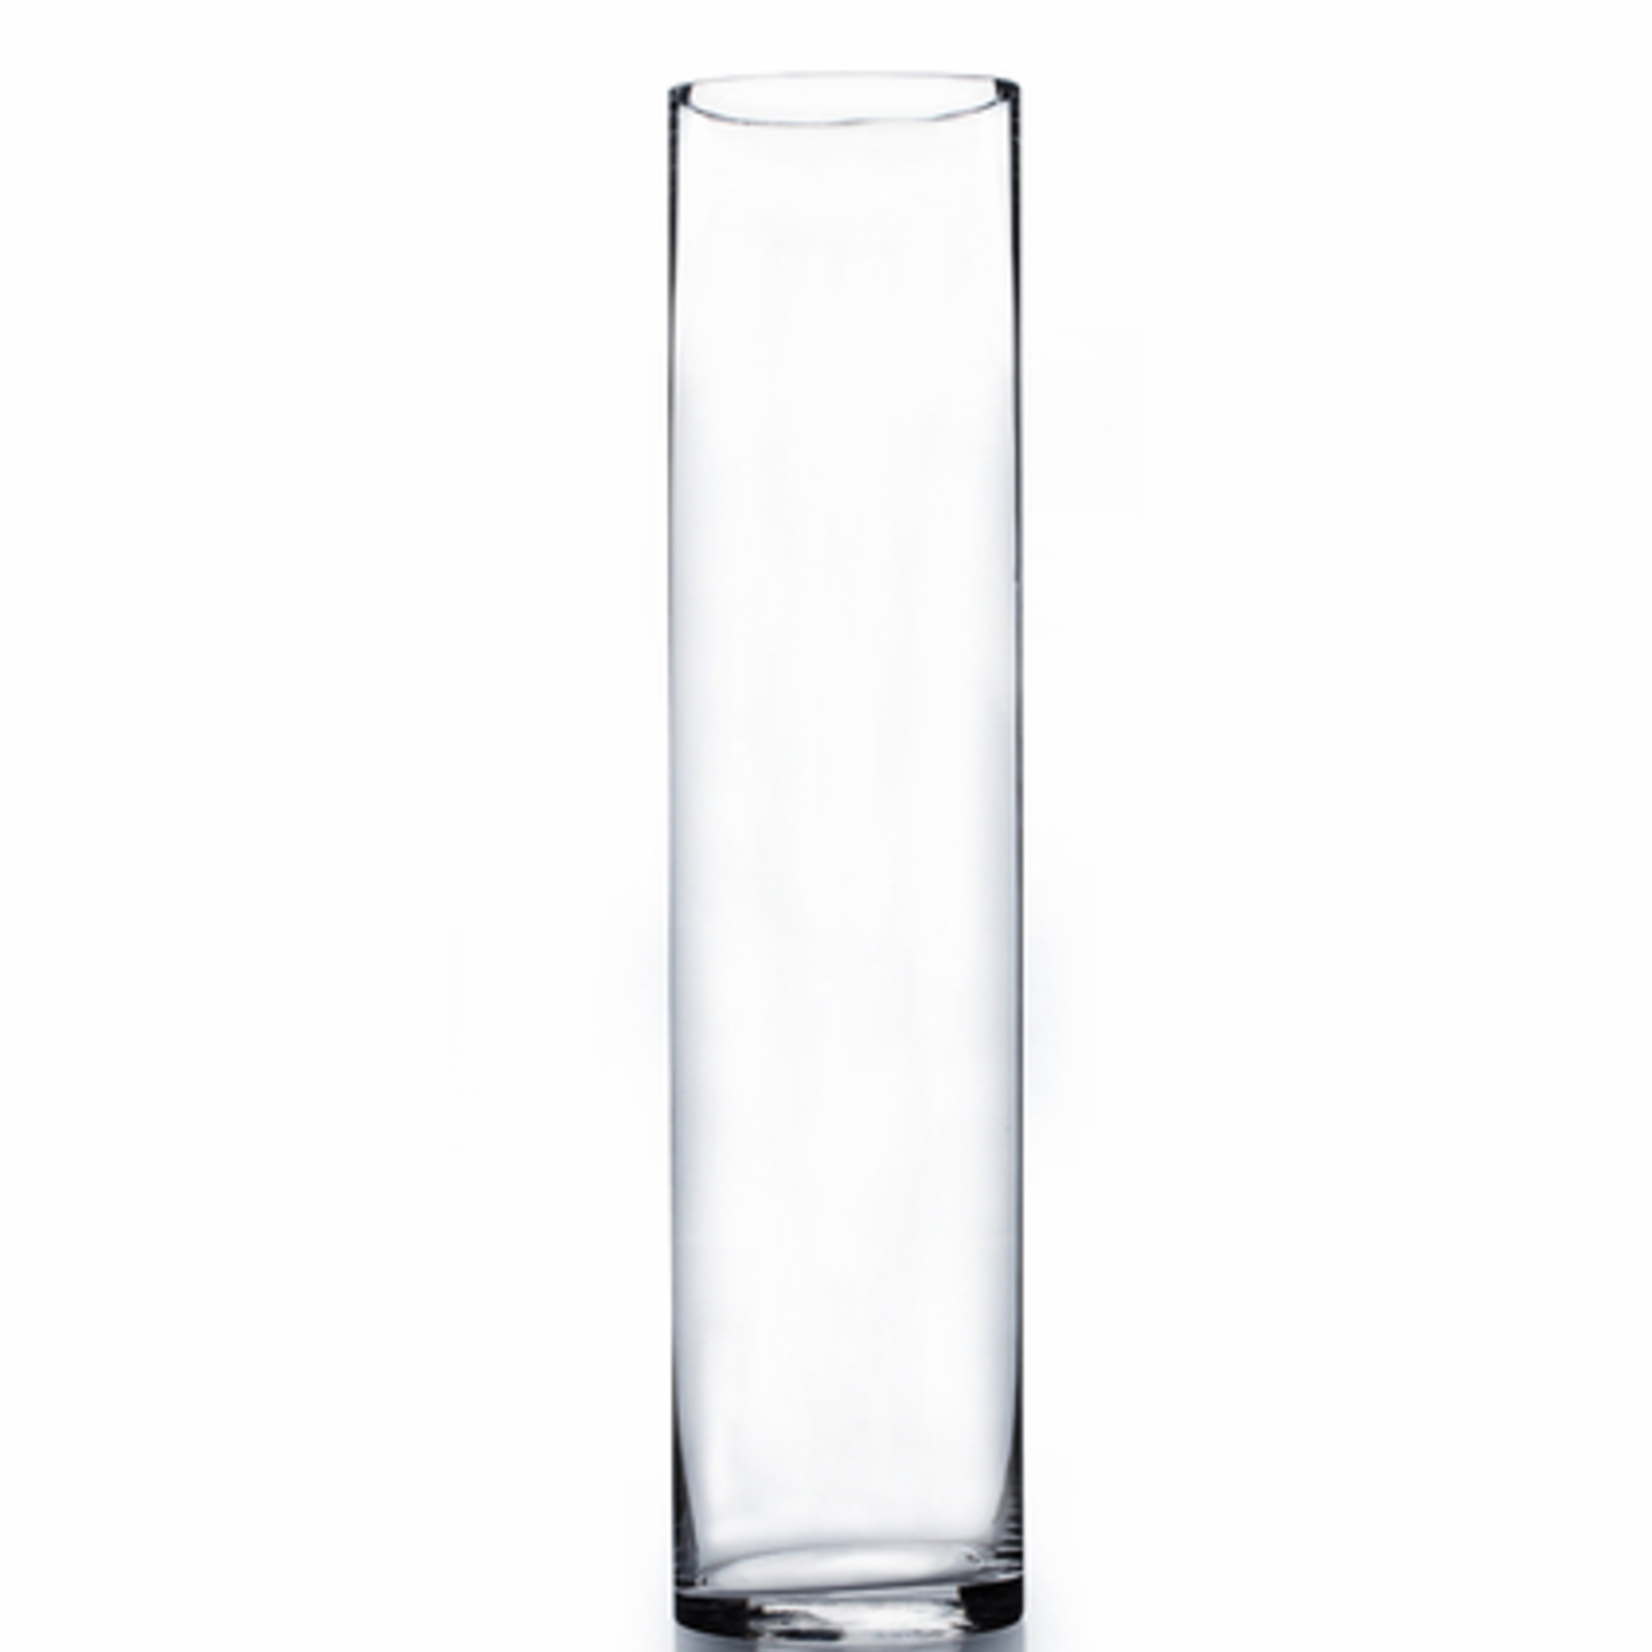 16"H X 4" CLEAR GLASS CYLINDER VASE